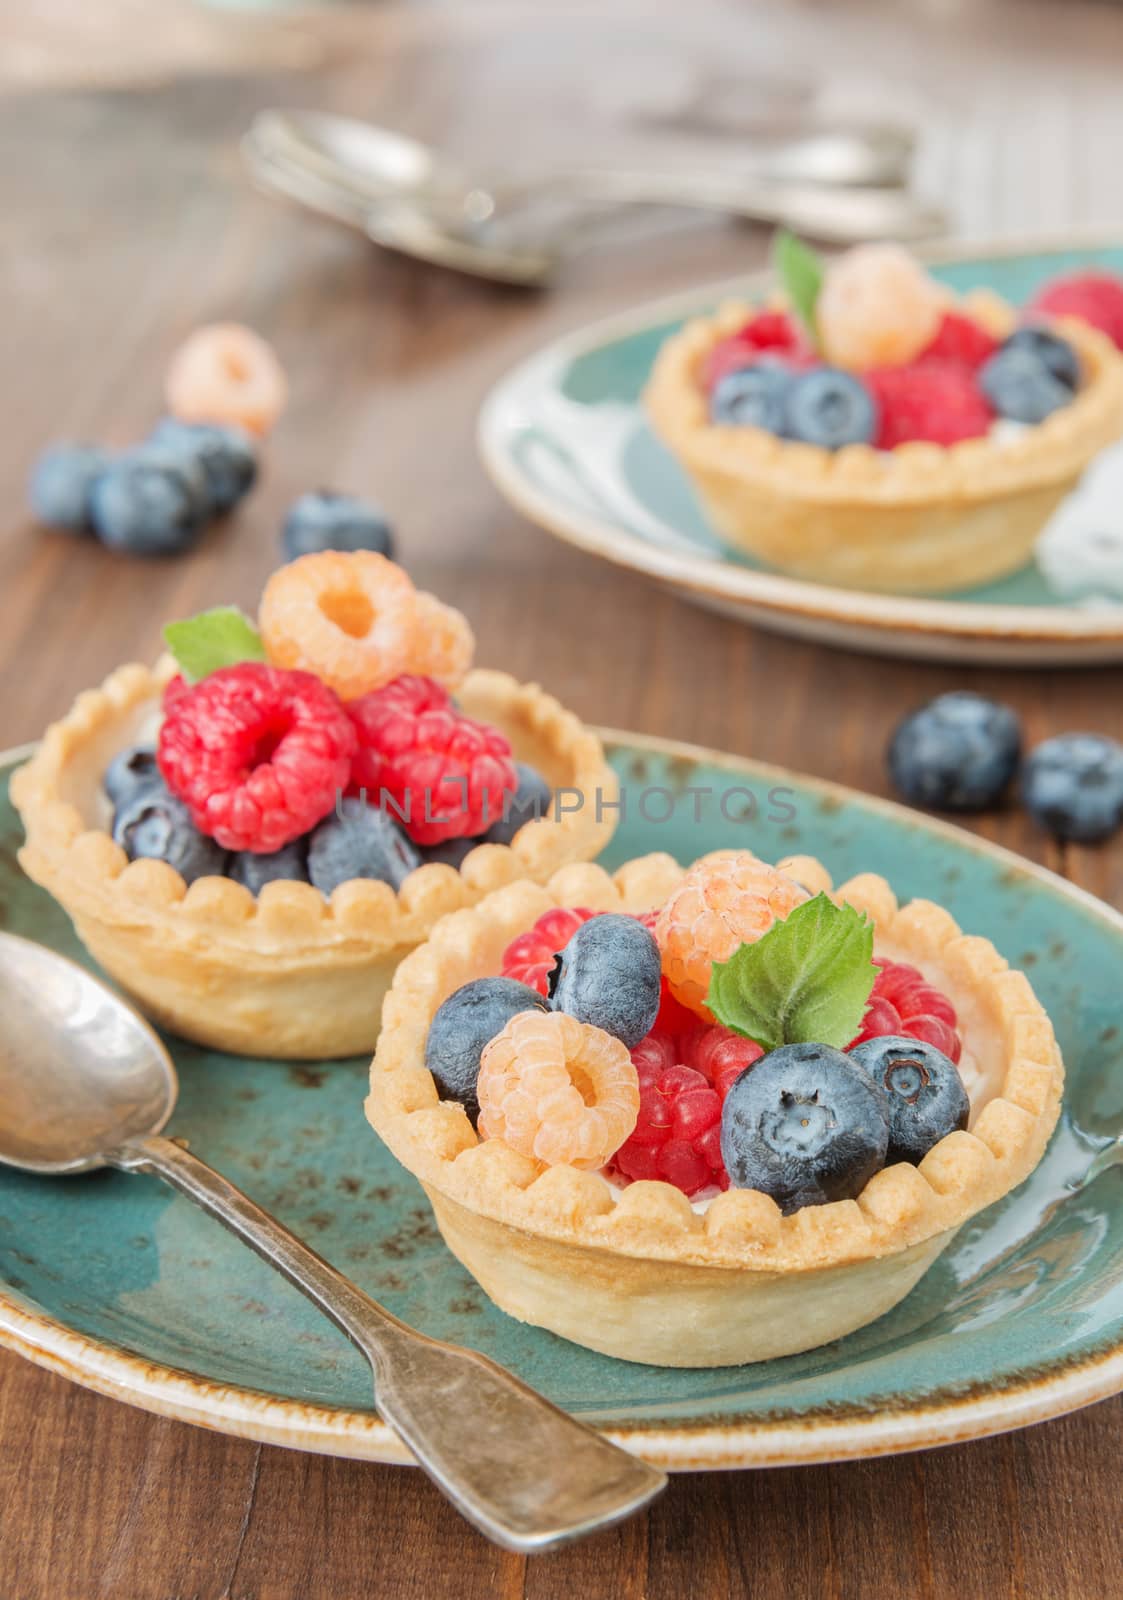 Fruit tartlets with cream, raspberries and blueberries on a blue vintage plates